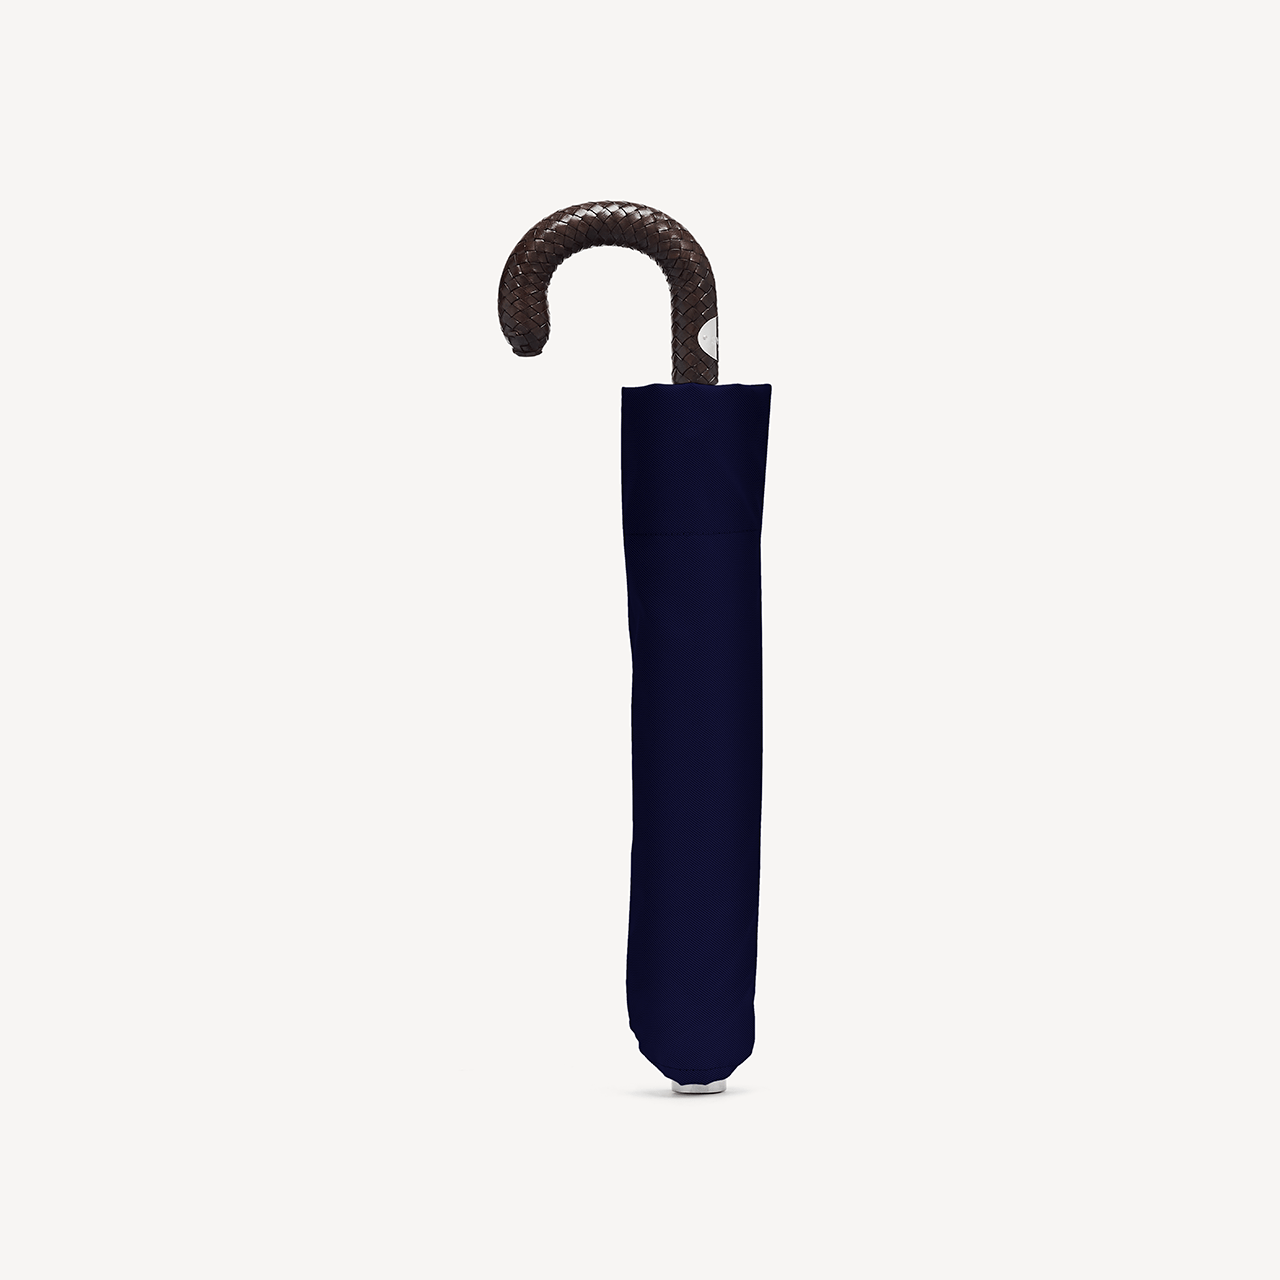 Collapsible Umbrella with Braided Leather Handle - Navy - Swaine